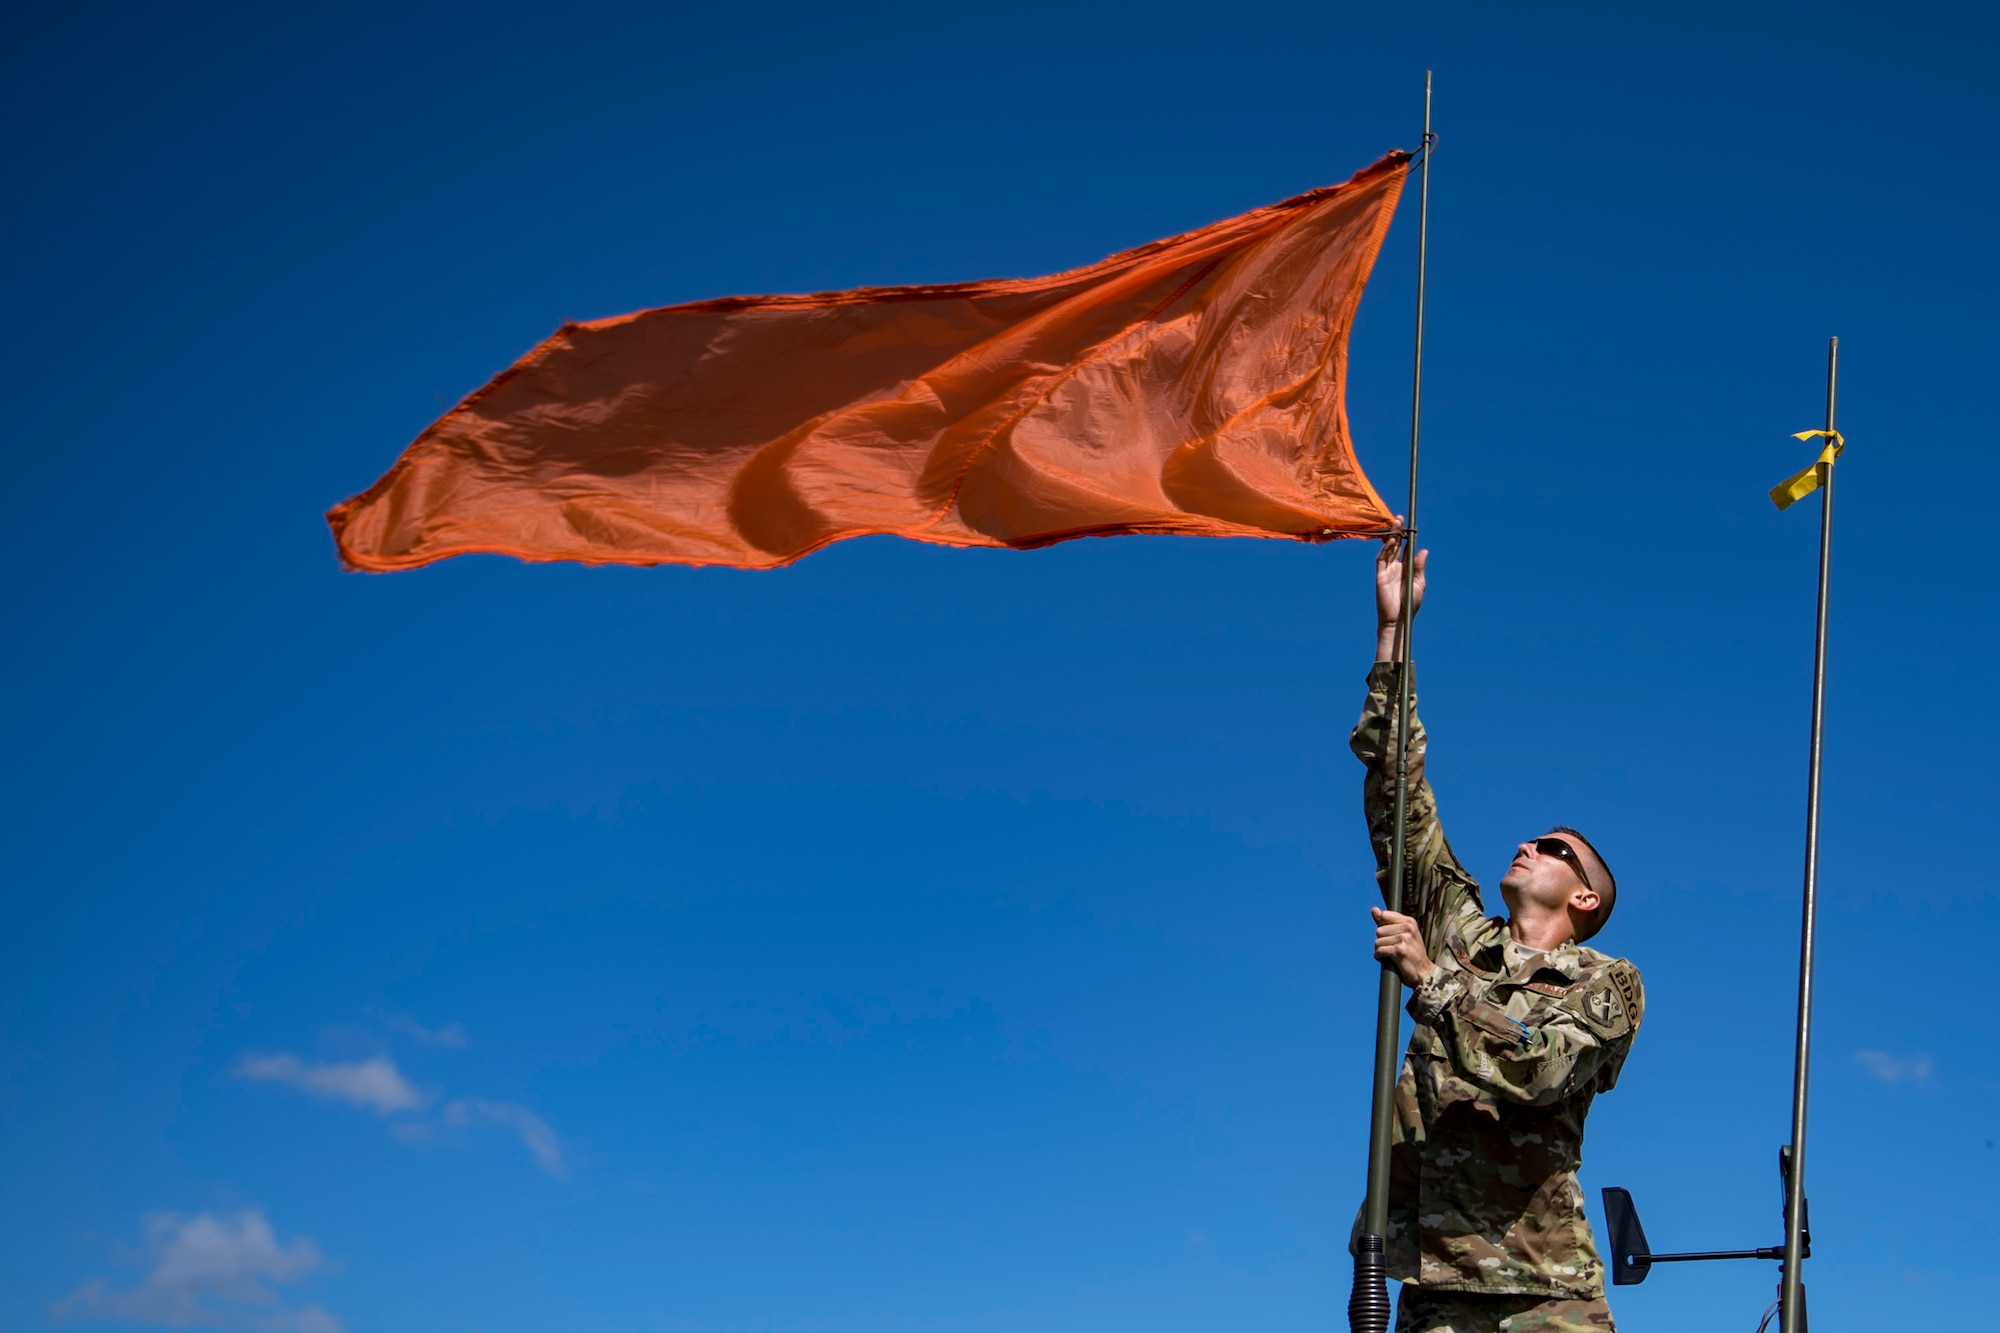 U.S. Air Force Tech. Sgt. John Schmidt, 820th Combat Operations Squadron (COS) NCO in charge of aircrew flight equipment, raises a flag that assists the drop-zone team in recognizing wind direction, Oct. 3, 2017, at the Lee Fulp drop zone in Tifton, Ga. The 820th COS’s four-person shop of parachute riggers are responsible for ensuring every 820th Base Defense Group parachute is serviceable, while also ensuring ground safety at the drop zone. The team has packed and inspected more than 490 parachutes in 2017. (U.S. Air Force photo by Airman 1st Class Daniel Snider)